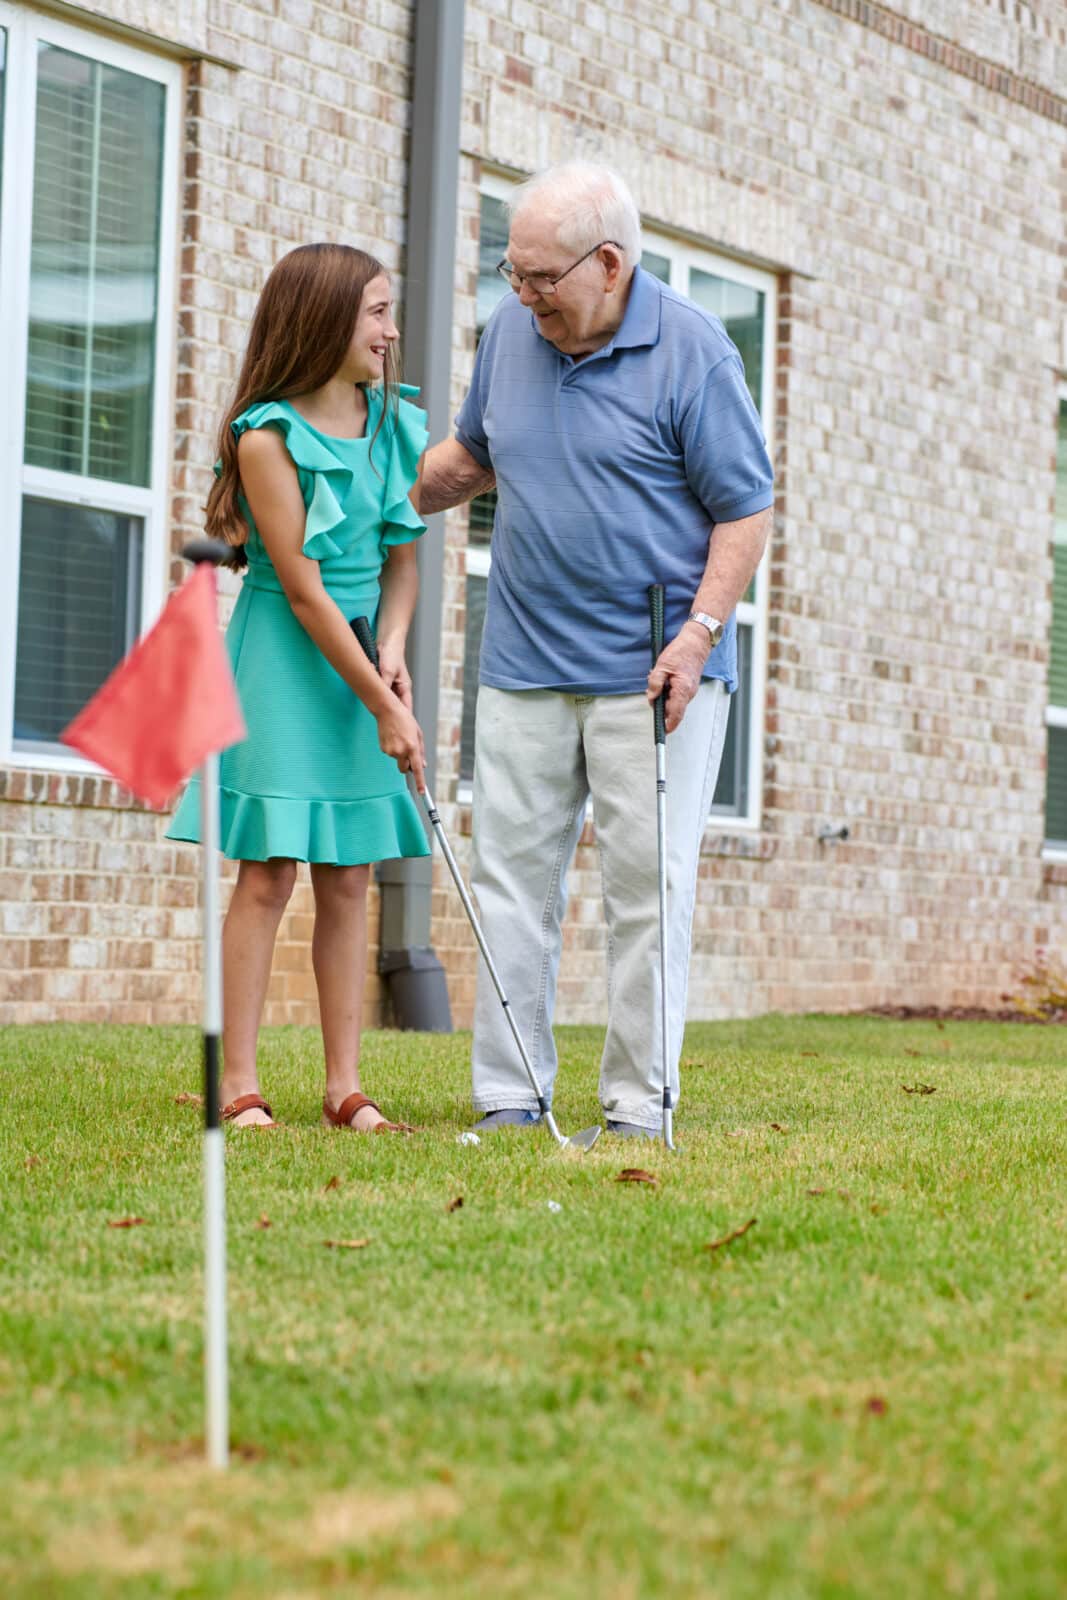 resident showing his granddaughter how to hold a golf club